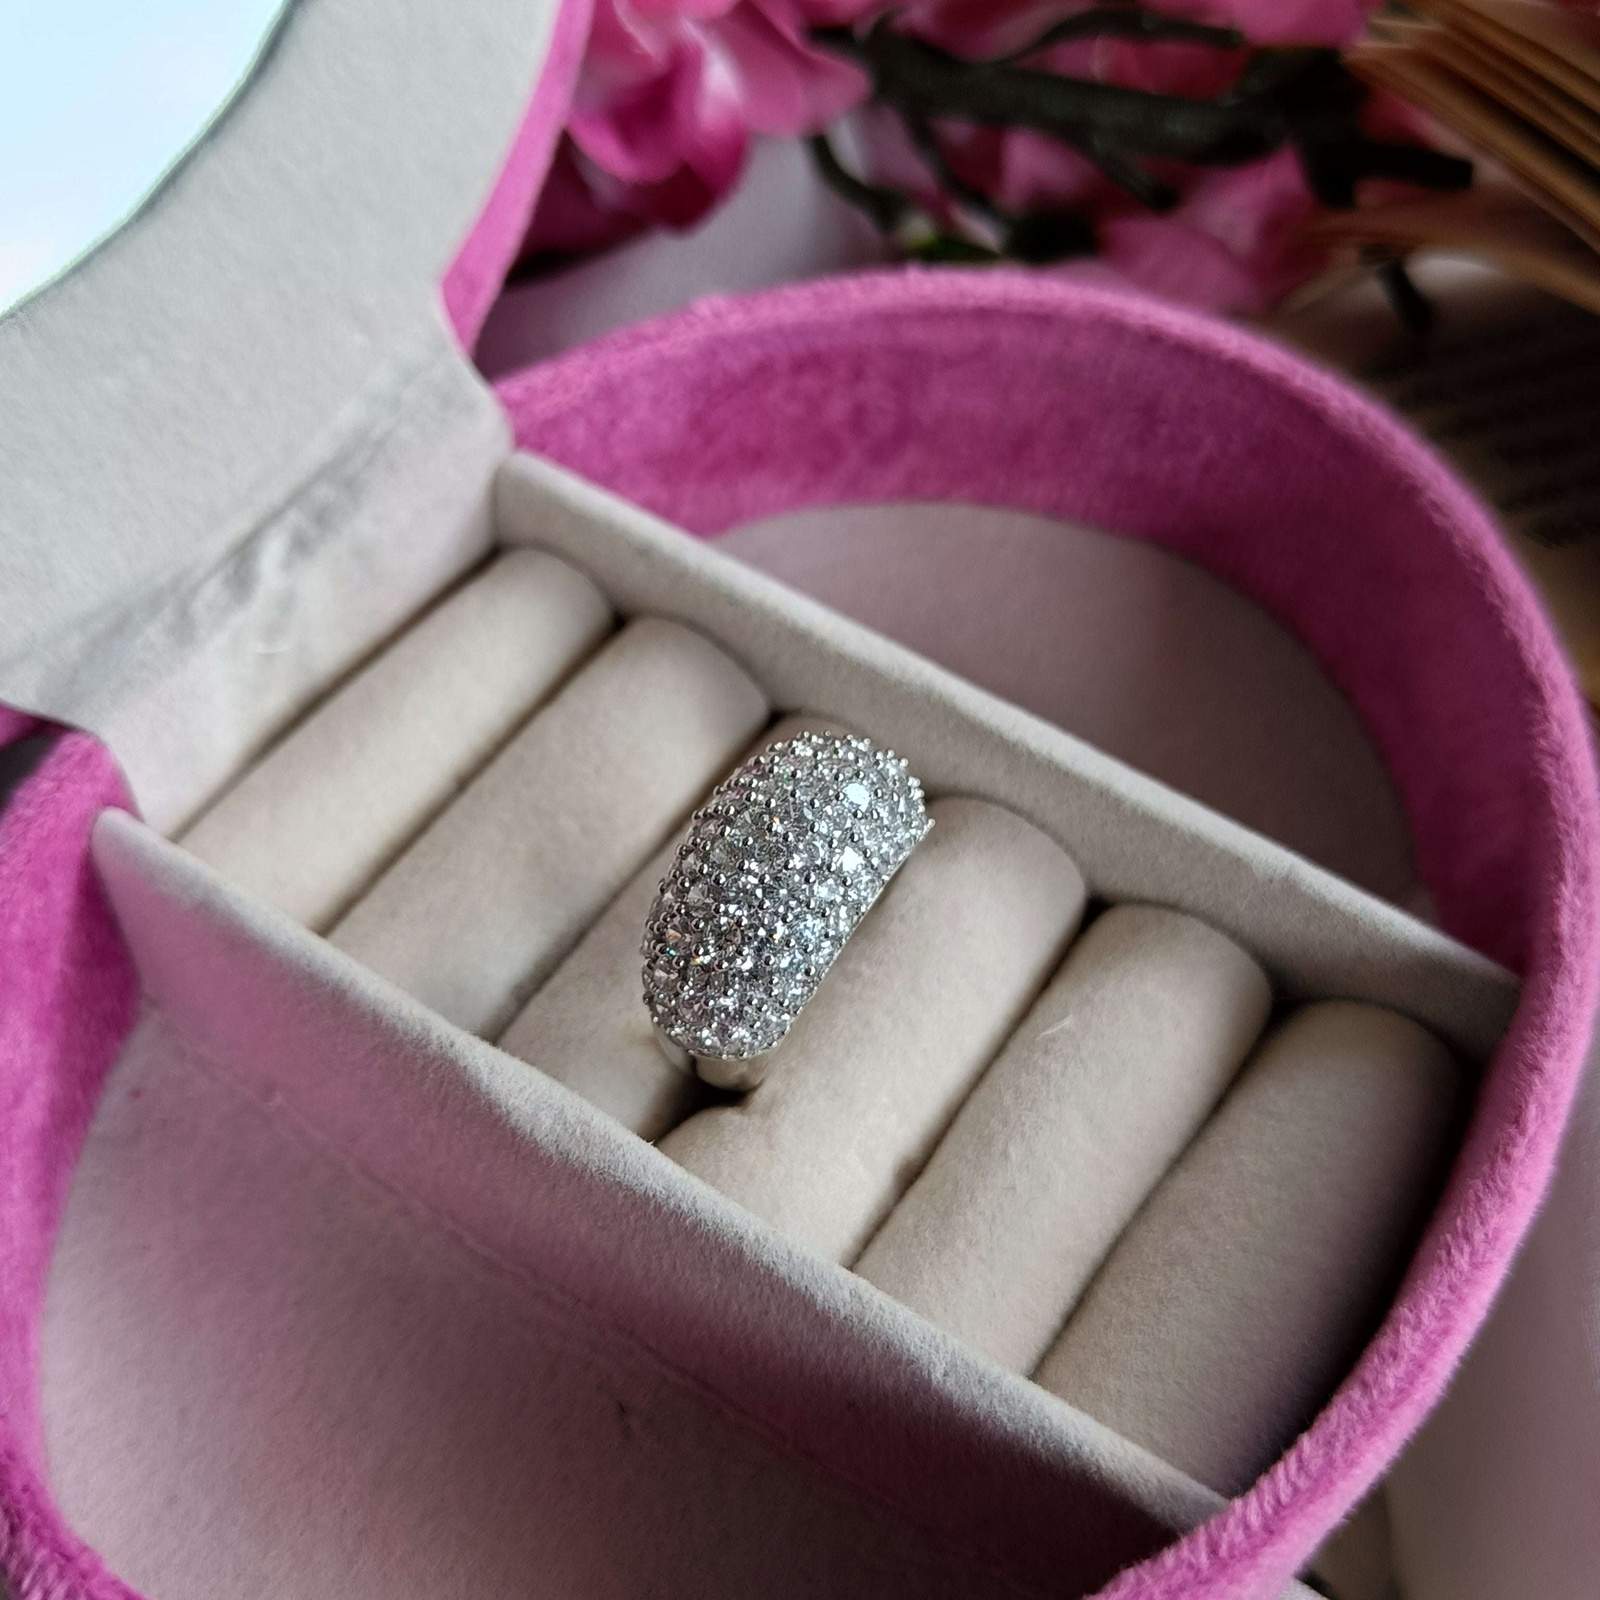 Vs sterling silver cocktail ring 095